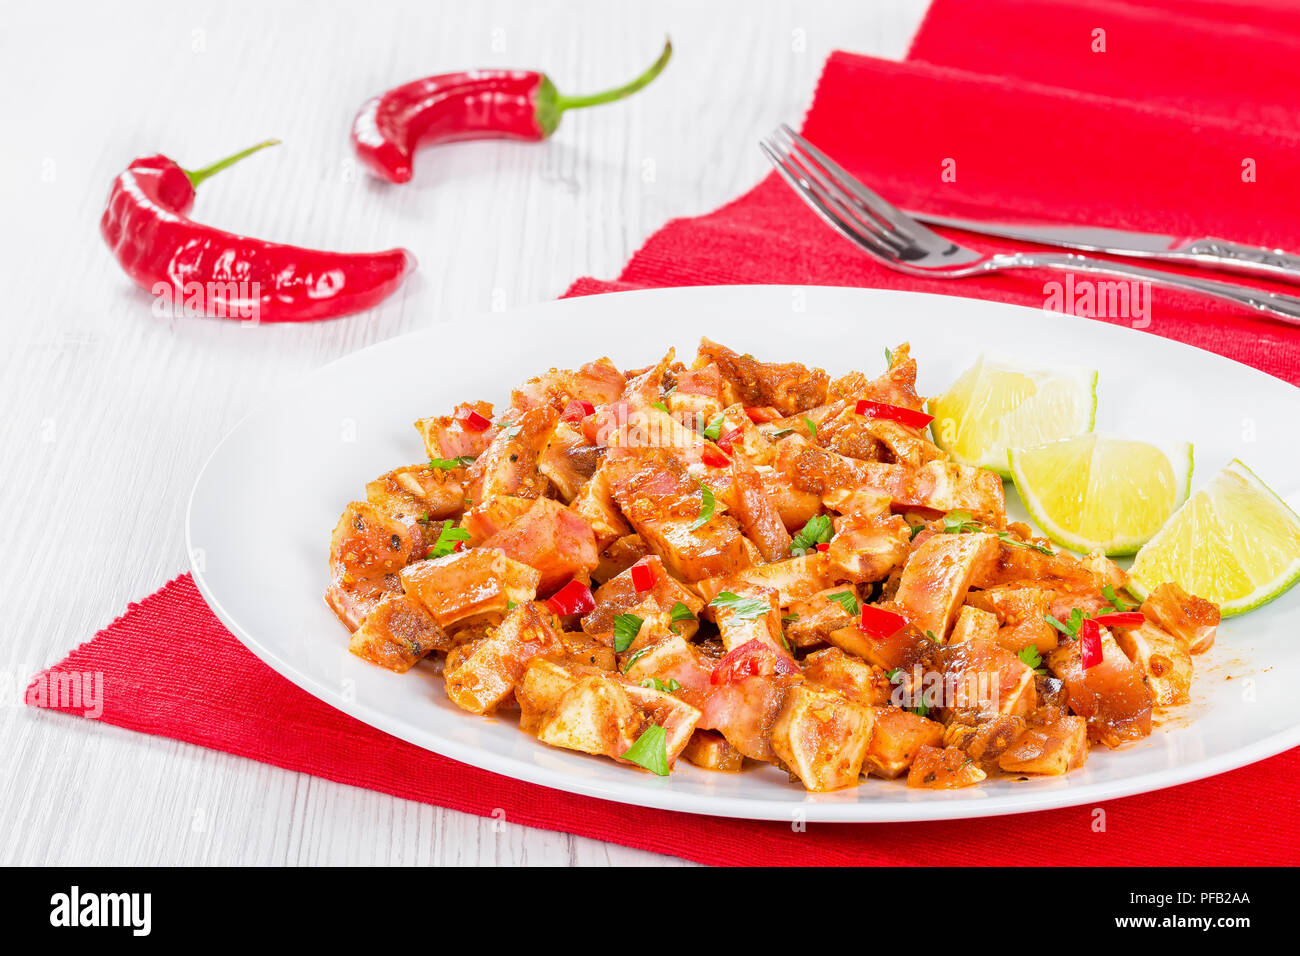 cooked and marinated Pig Ears or Oreja de Cerdo with spices, chili pepper, pieces of lime sprinkled with parsley on white platter on wooden old boards Stock Photo